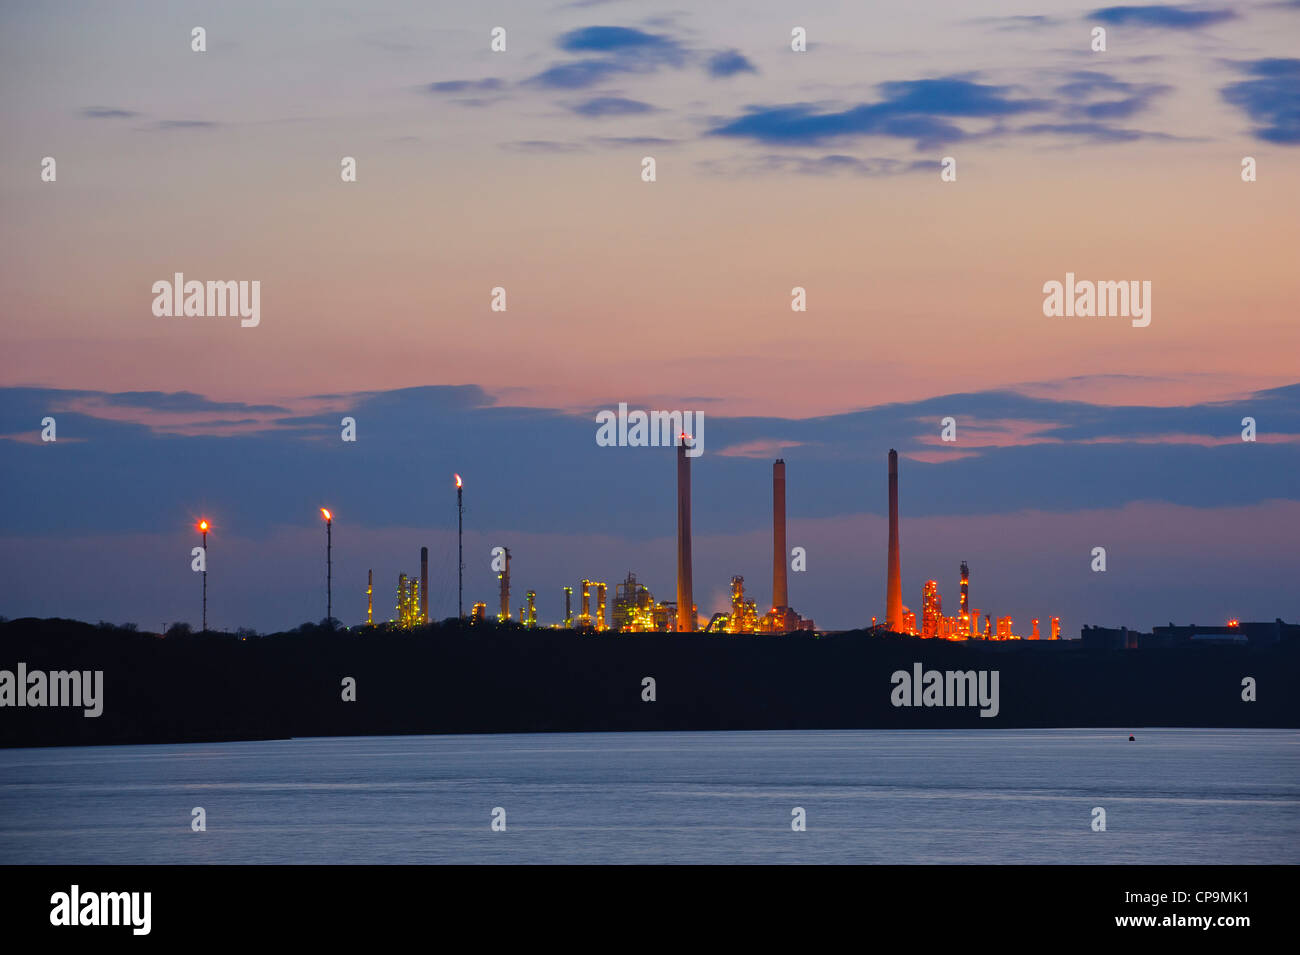 Oil refinery at dusk near Milford Haven, Wales, UK Stock Photo